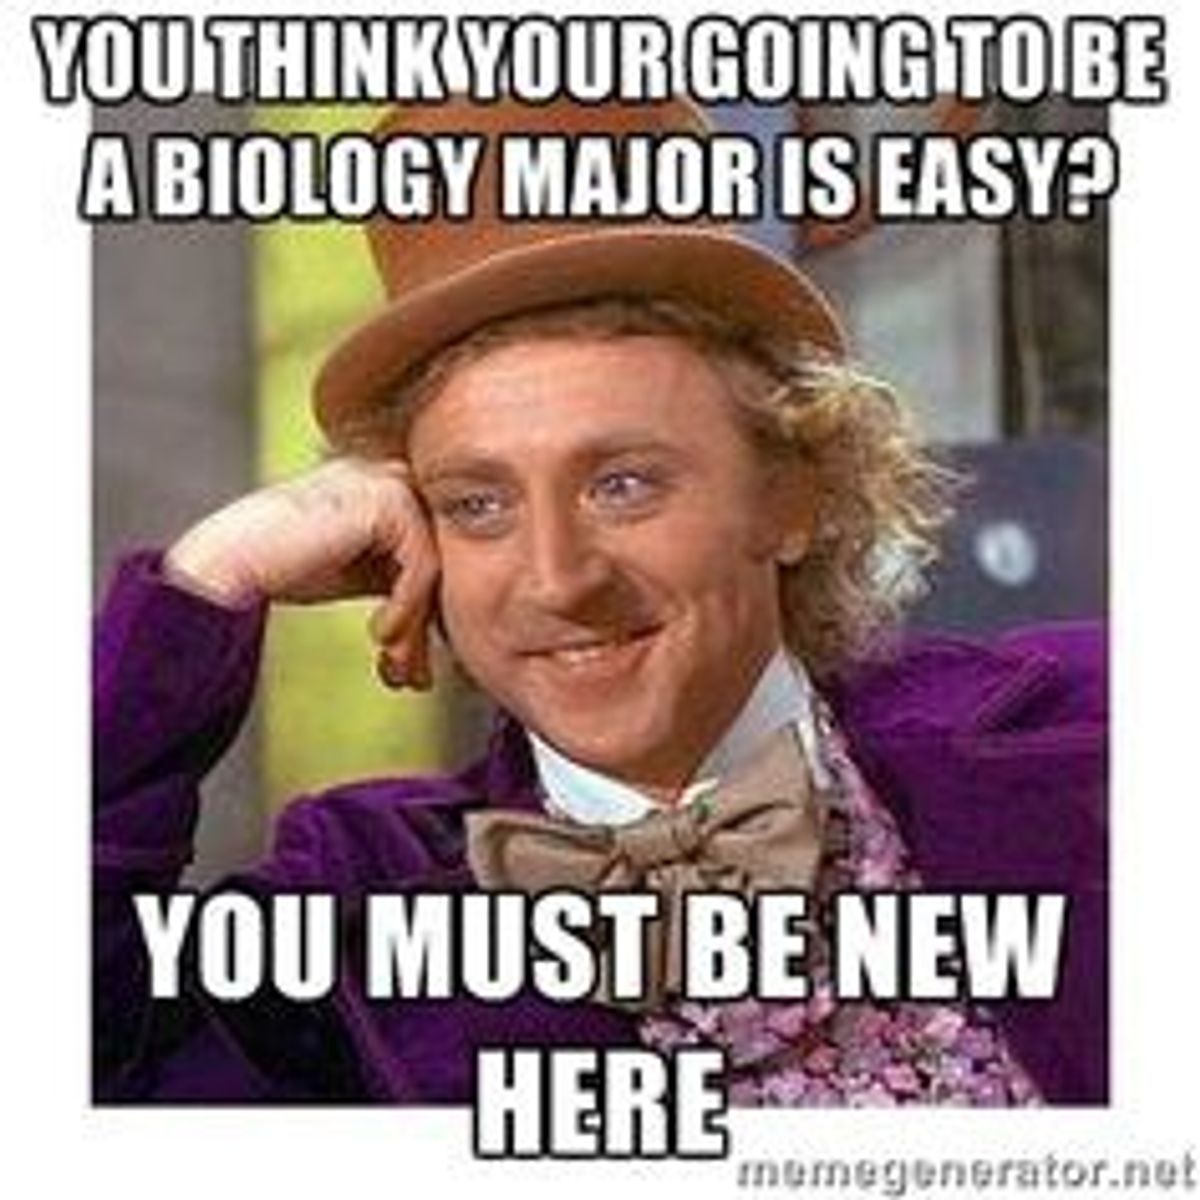 12 Ways You Know You're a Biology Major